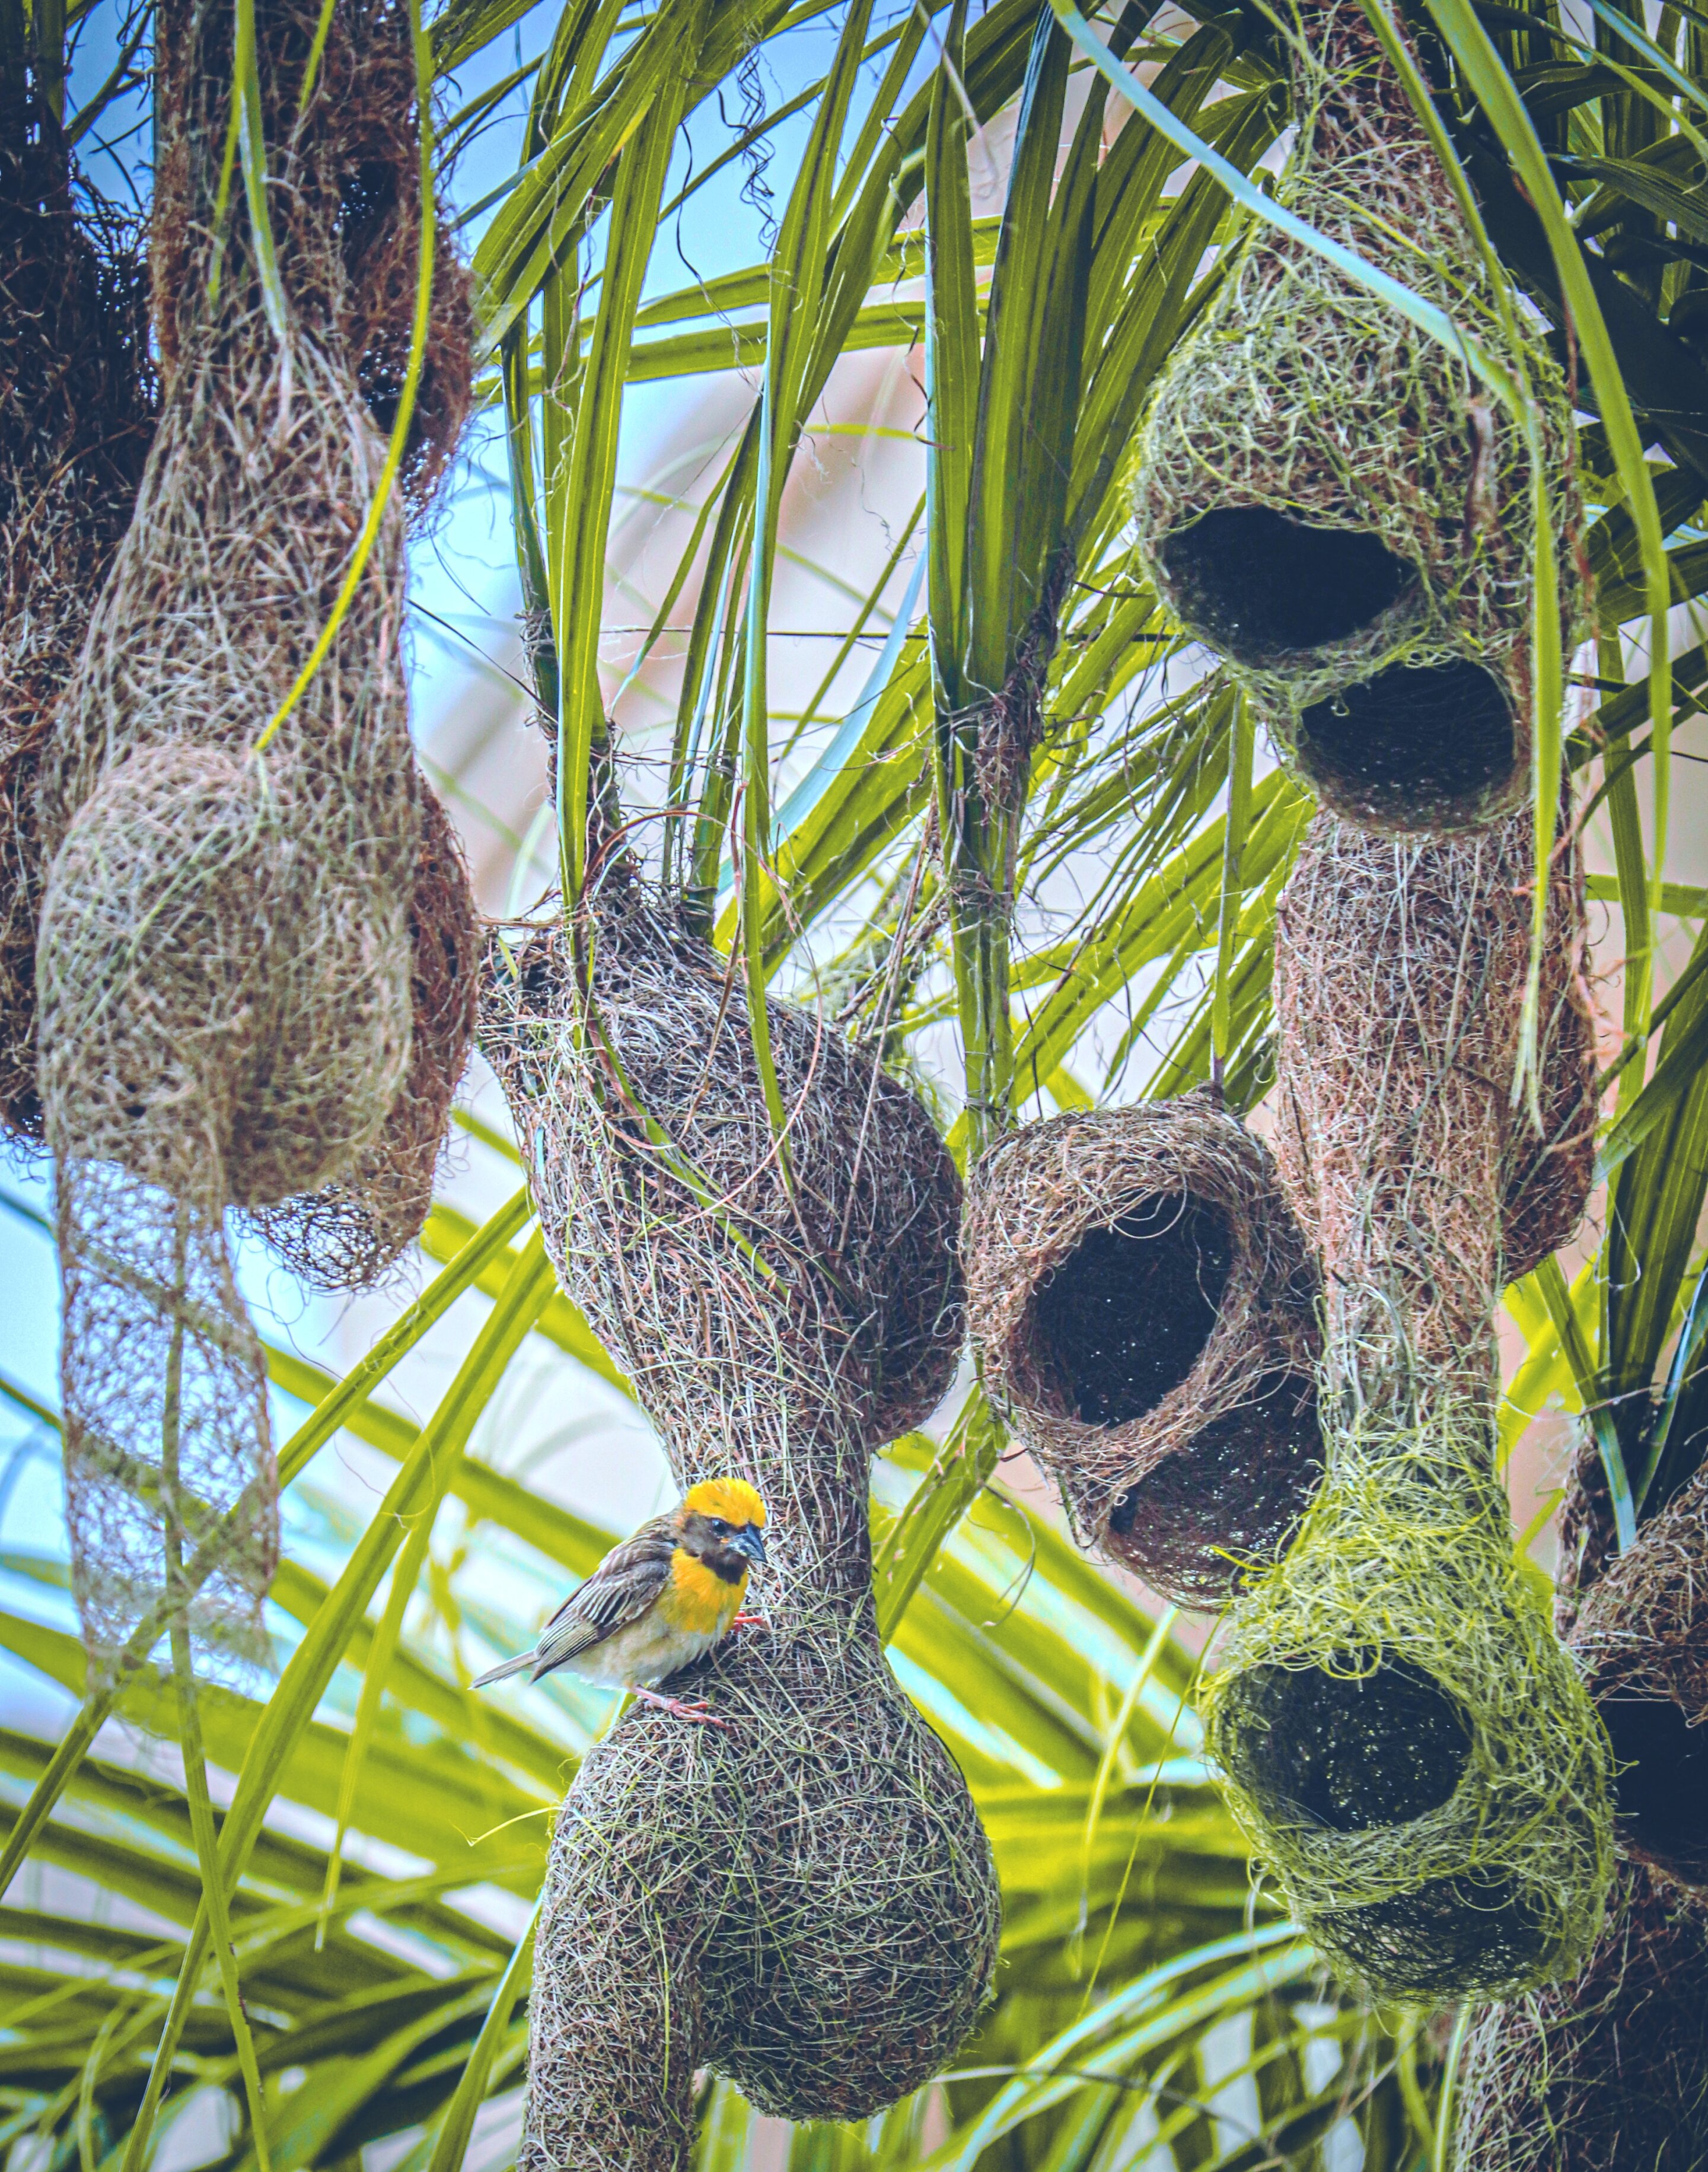 #New study finds birds build hanging-nests to protect offspring from nest invaders